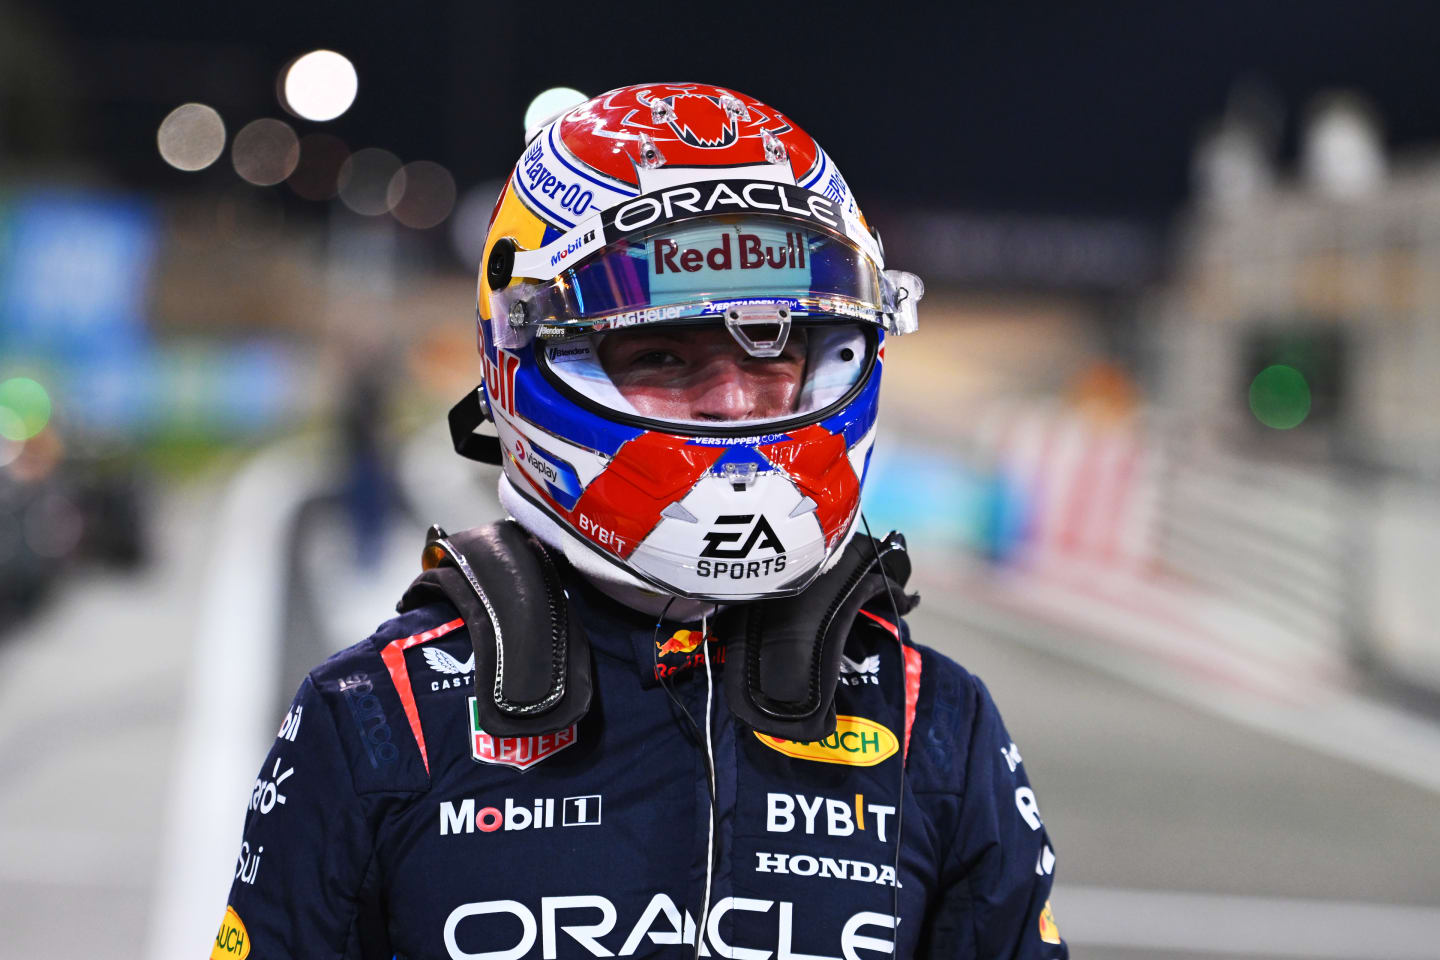 BAHRAIN, BAHRAIN - MARCH 01: Pole position qualifier Max Verstappen of the Netherlands and Oracle Red Bull Racing celebrates in parc ferme during qualifying ahead of the F1 Grand Prix of Bahrain at Bahrain International Circuit on March 01, 2024 in Bahrain, Bahrain. (Photo by Rudy Carezzevoli/Getty Images)